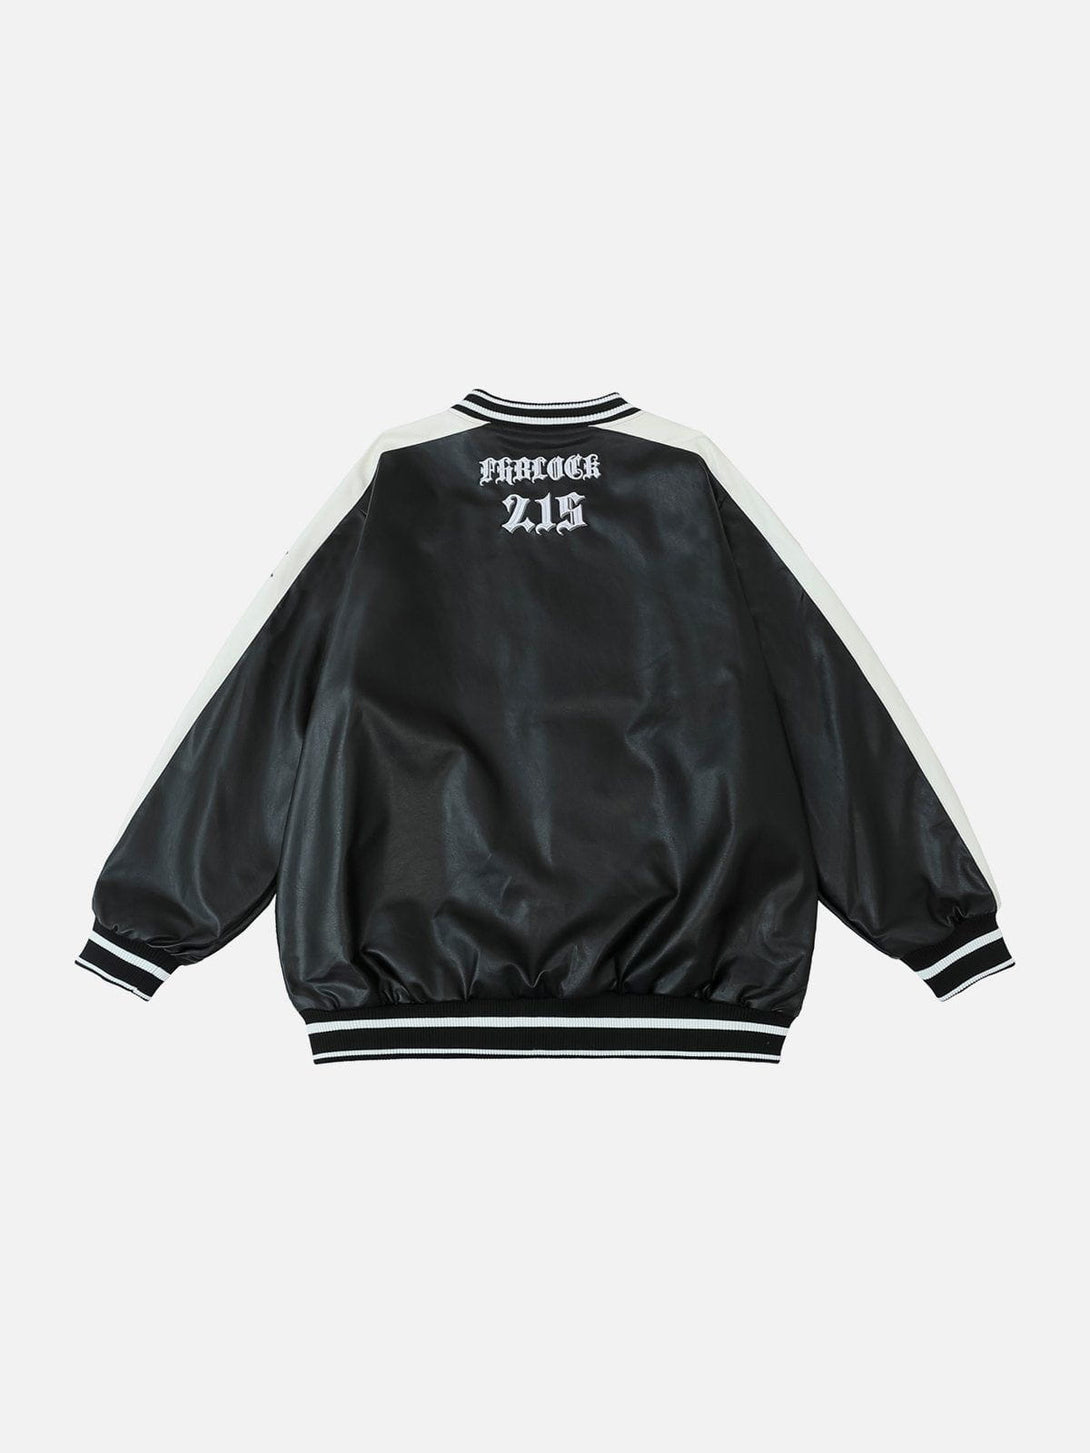 Levefly - Embroidered Colorblock Leather Jacket - Streetwear Fashion - levefly.com